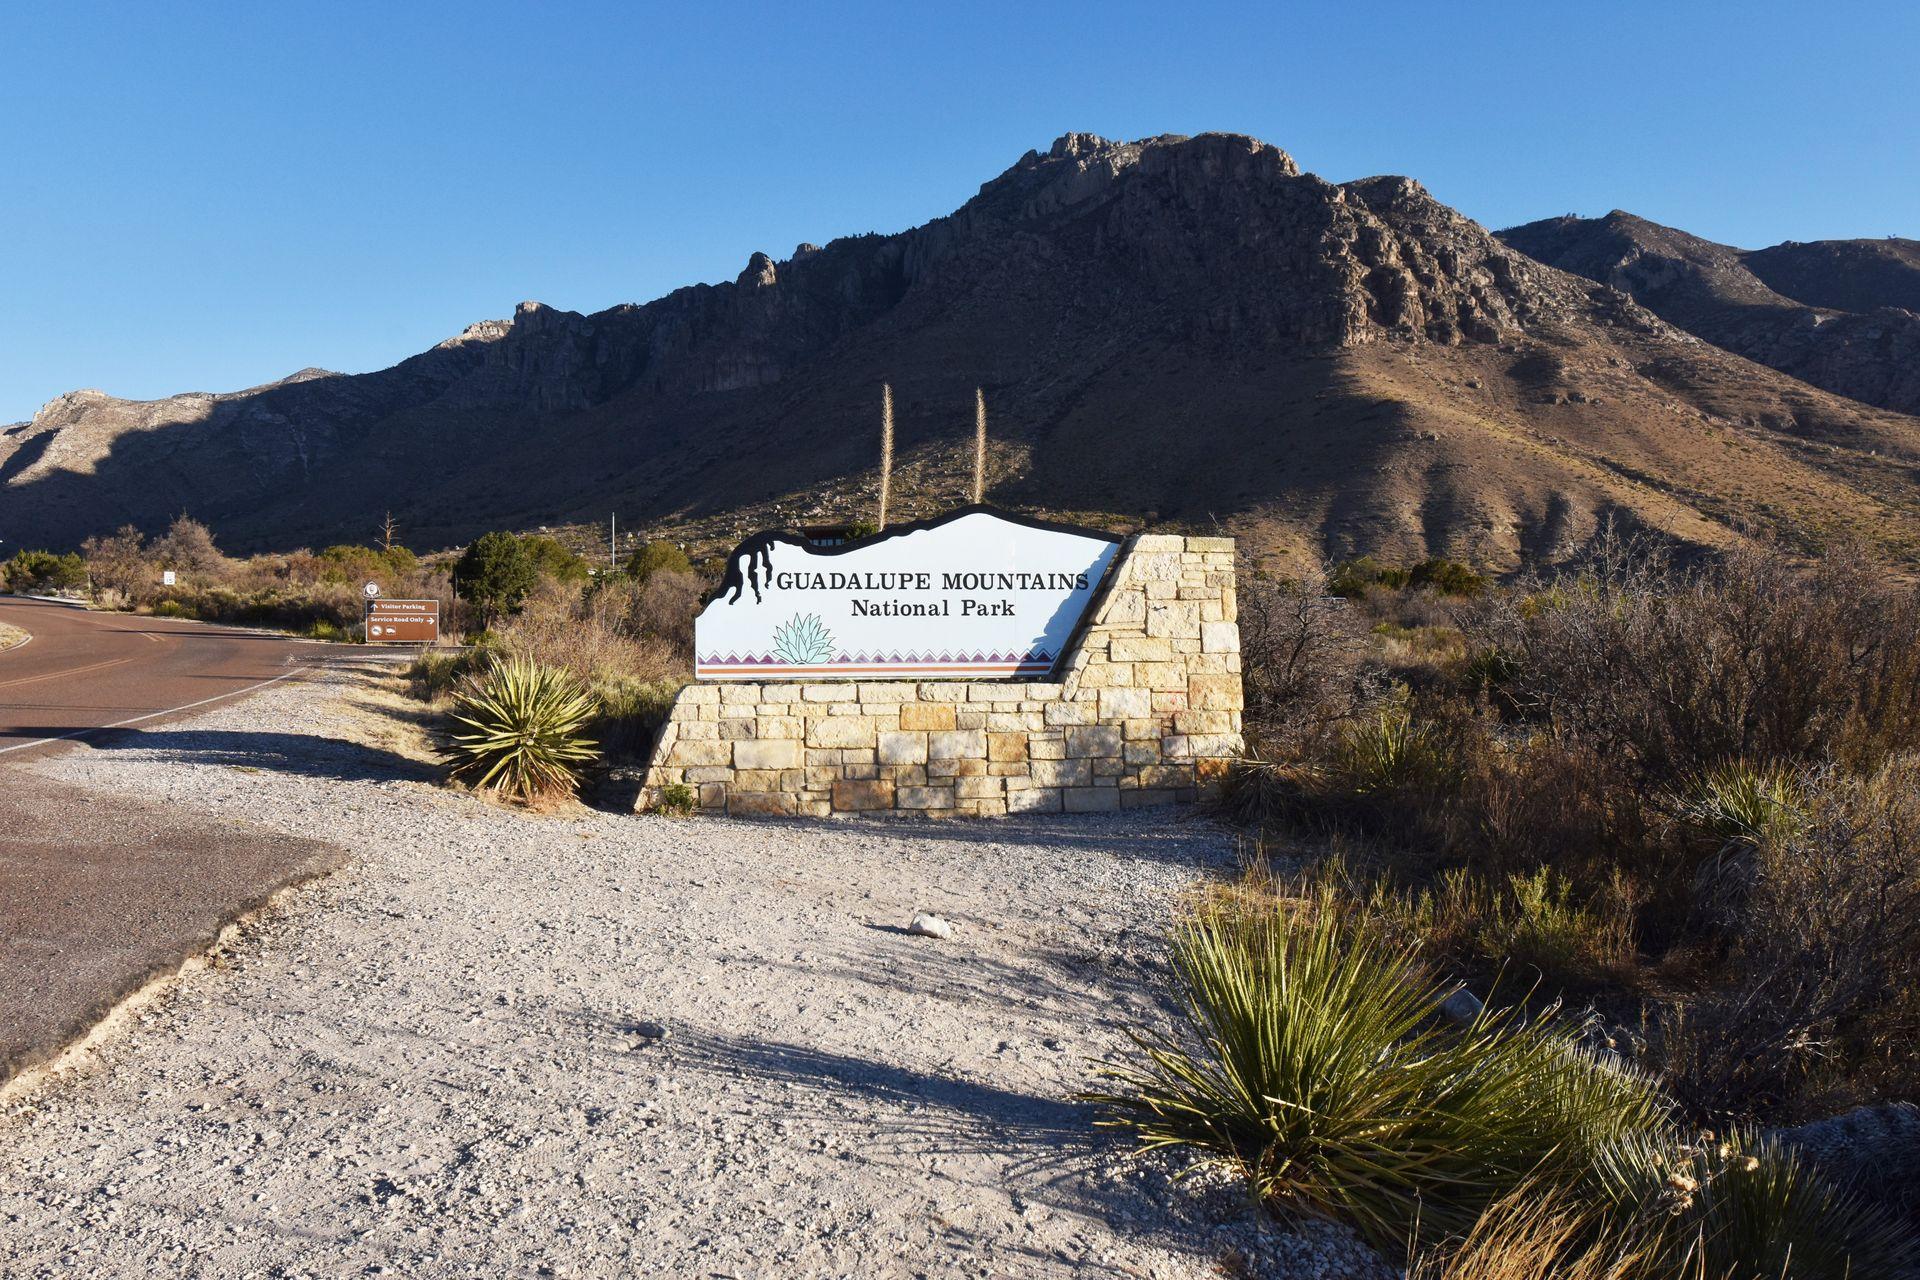 The national park entrance park sign for the Guadalupe Mountains. The sign is light blue with a geometric pattern and a desert plant on the bottom.